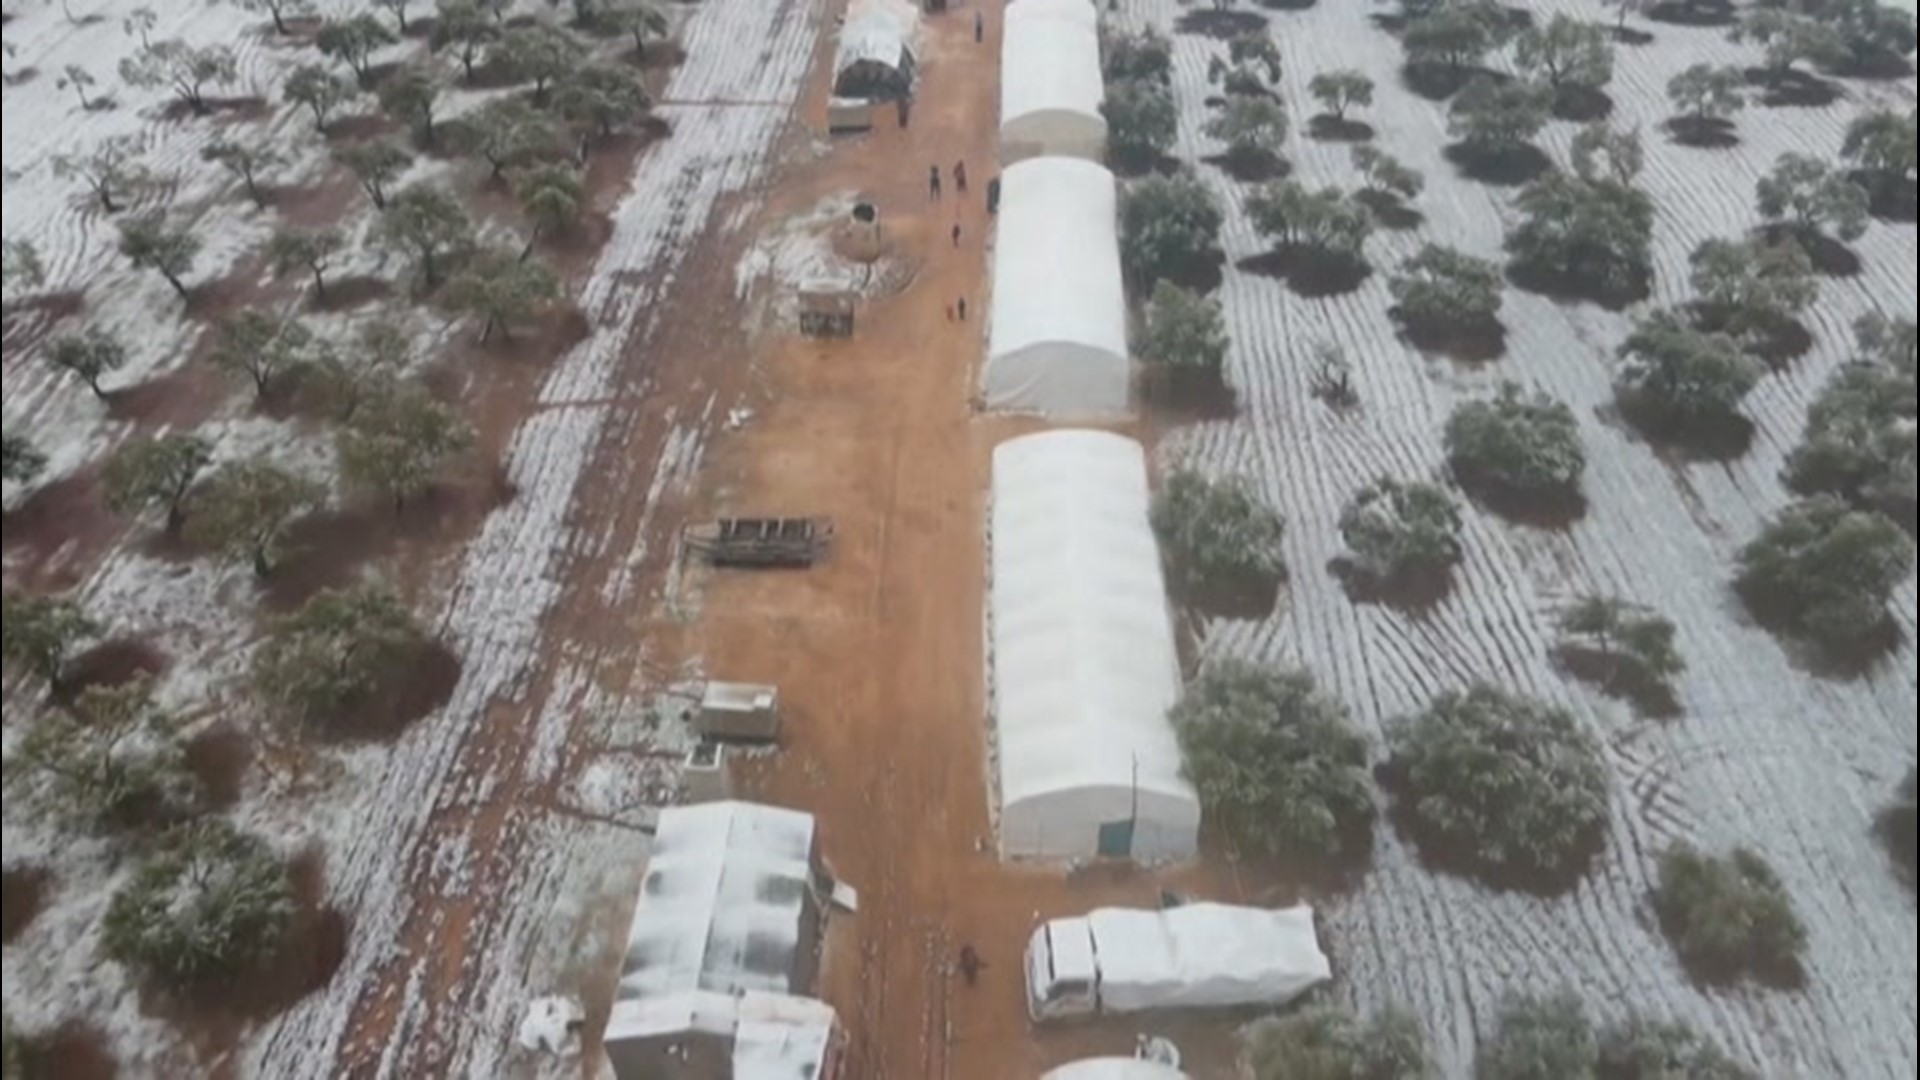 Syrians displaced by war are facing new challenges, with freezing weather and snow blanketing the camp that humanitarian officials say was already inadequate.